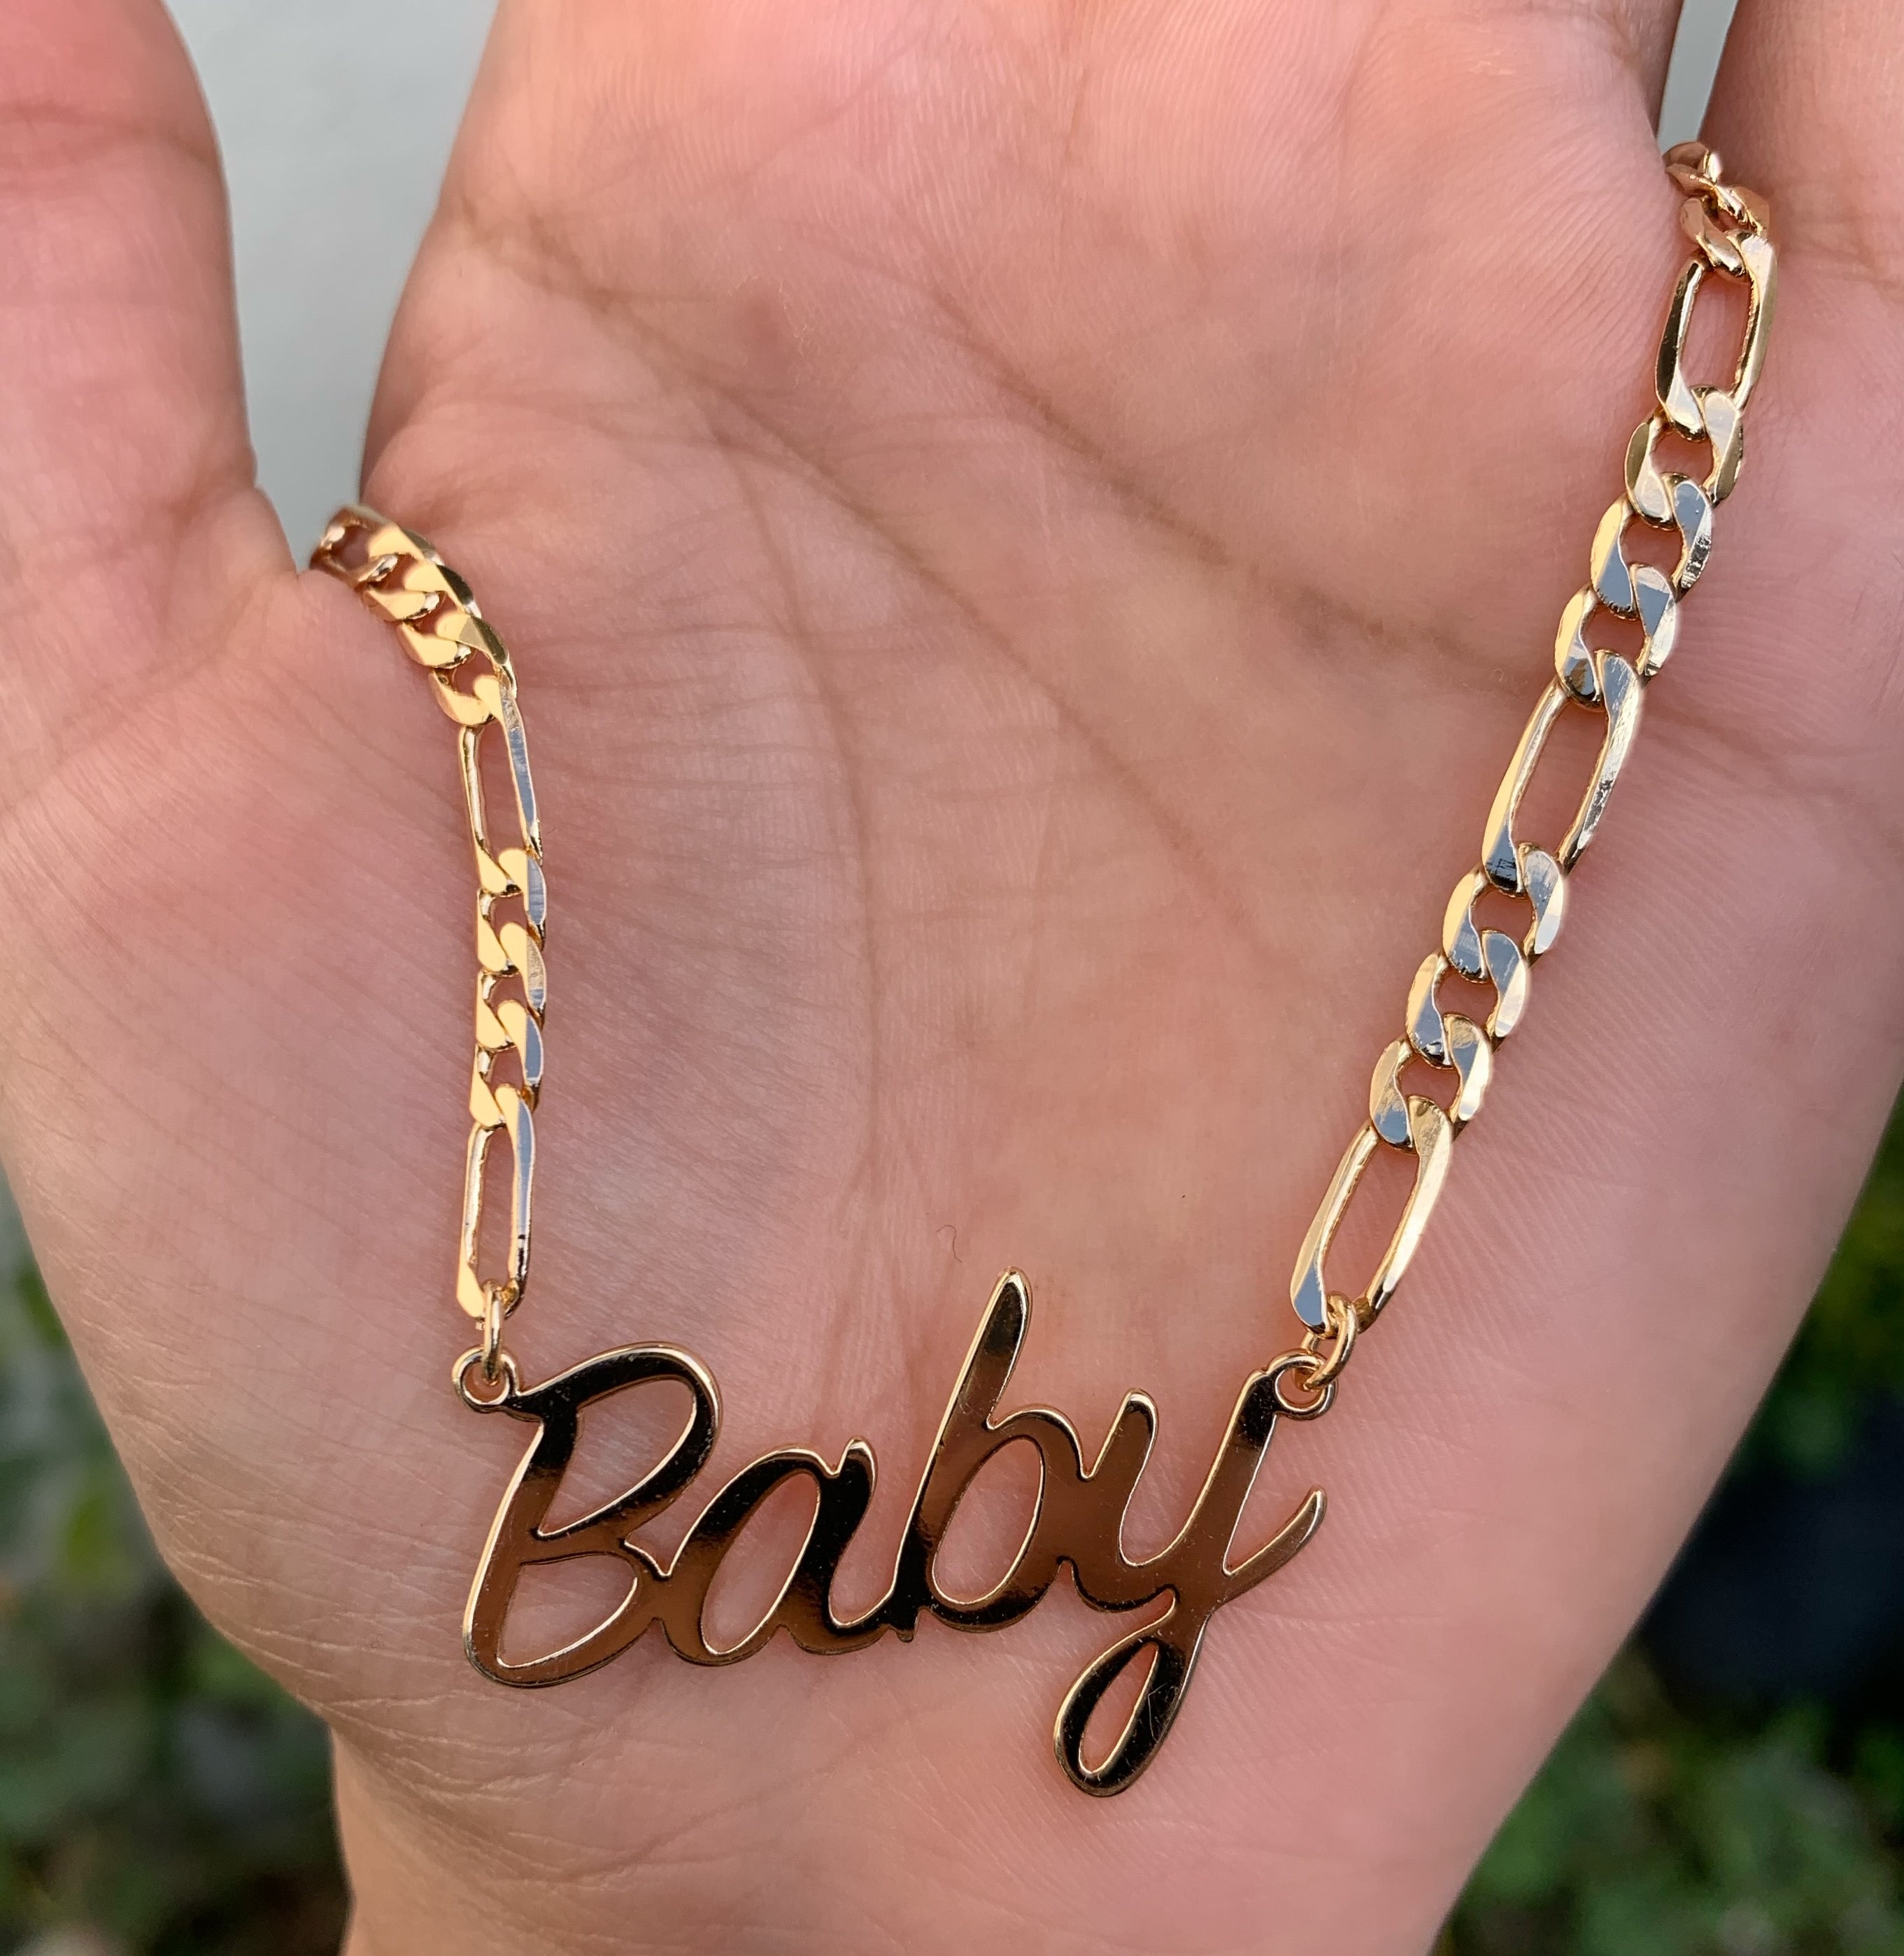 Baby necklace